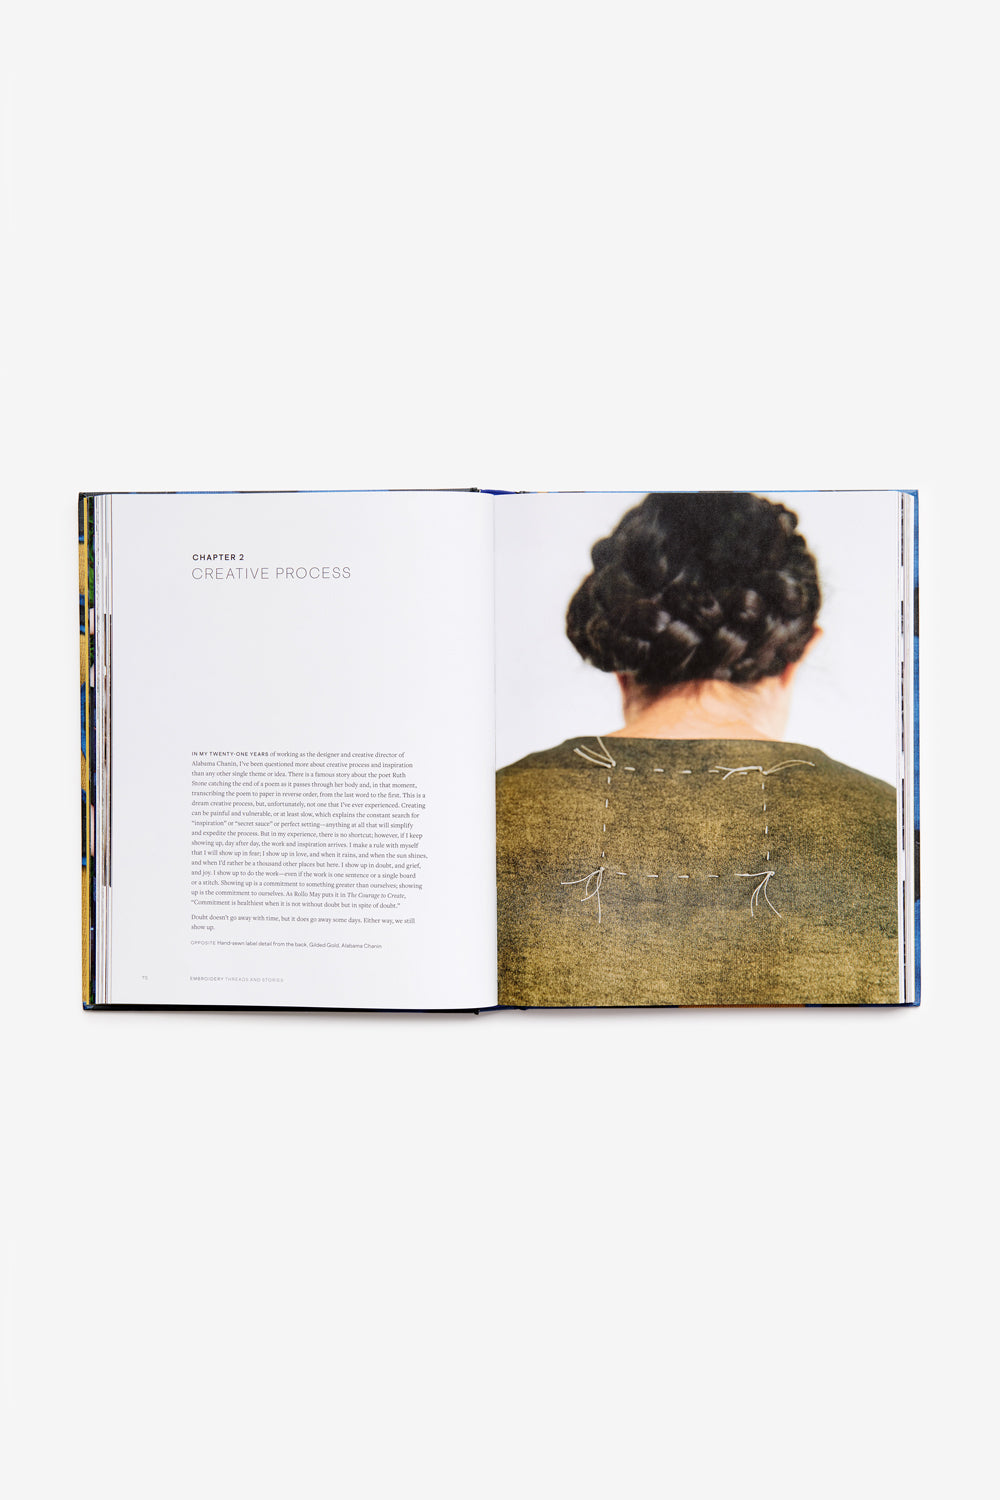 The Creative Process chapter of Natalie Chanin's book, Embroidery: Threads and Stories.